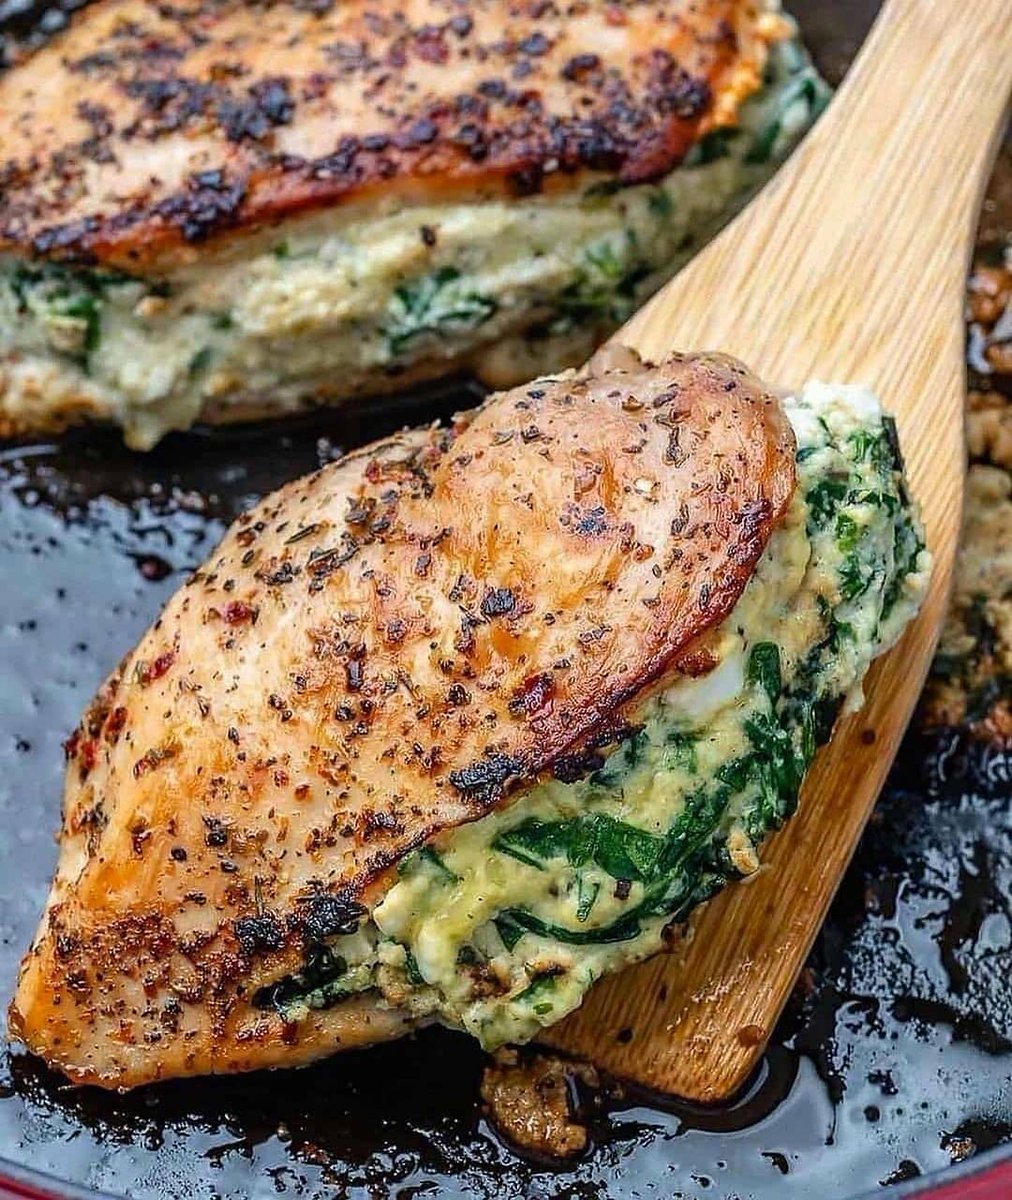 🍗 Spinach and Cheese Stuffed Chicken🤤🔥 🙋Don’t forget to Get FREE eBook 🎁📩 'Ketogenic Diet: 365 Days of Keto, Low-Carb Recipes for Rapid Weight Loss' are available. Click the link below to get your ebook 👇 beacons.ai/lowcarbjiji/ By: healthyfitnessmeals #keto #lowcarb